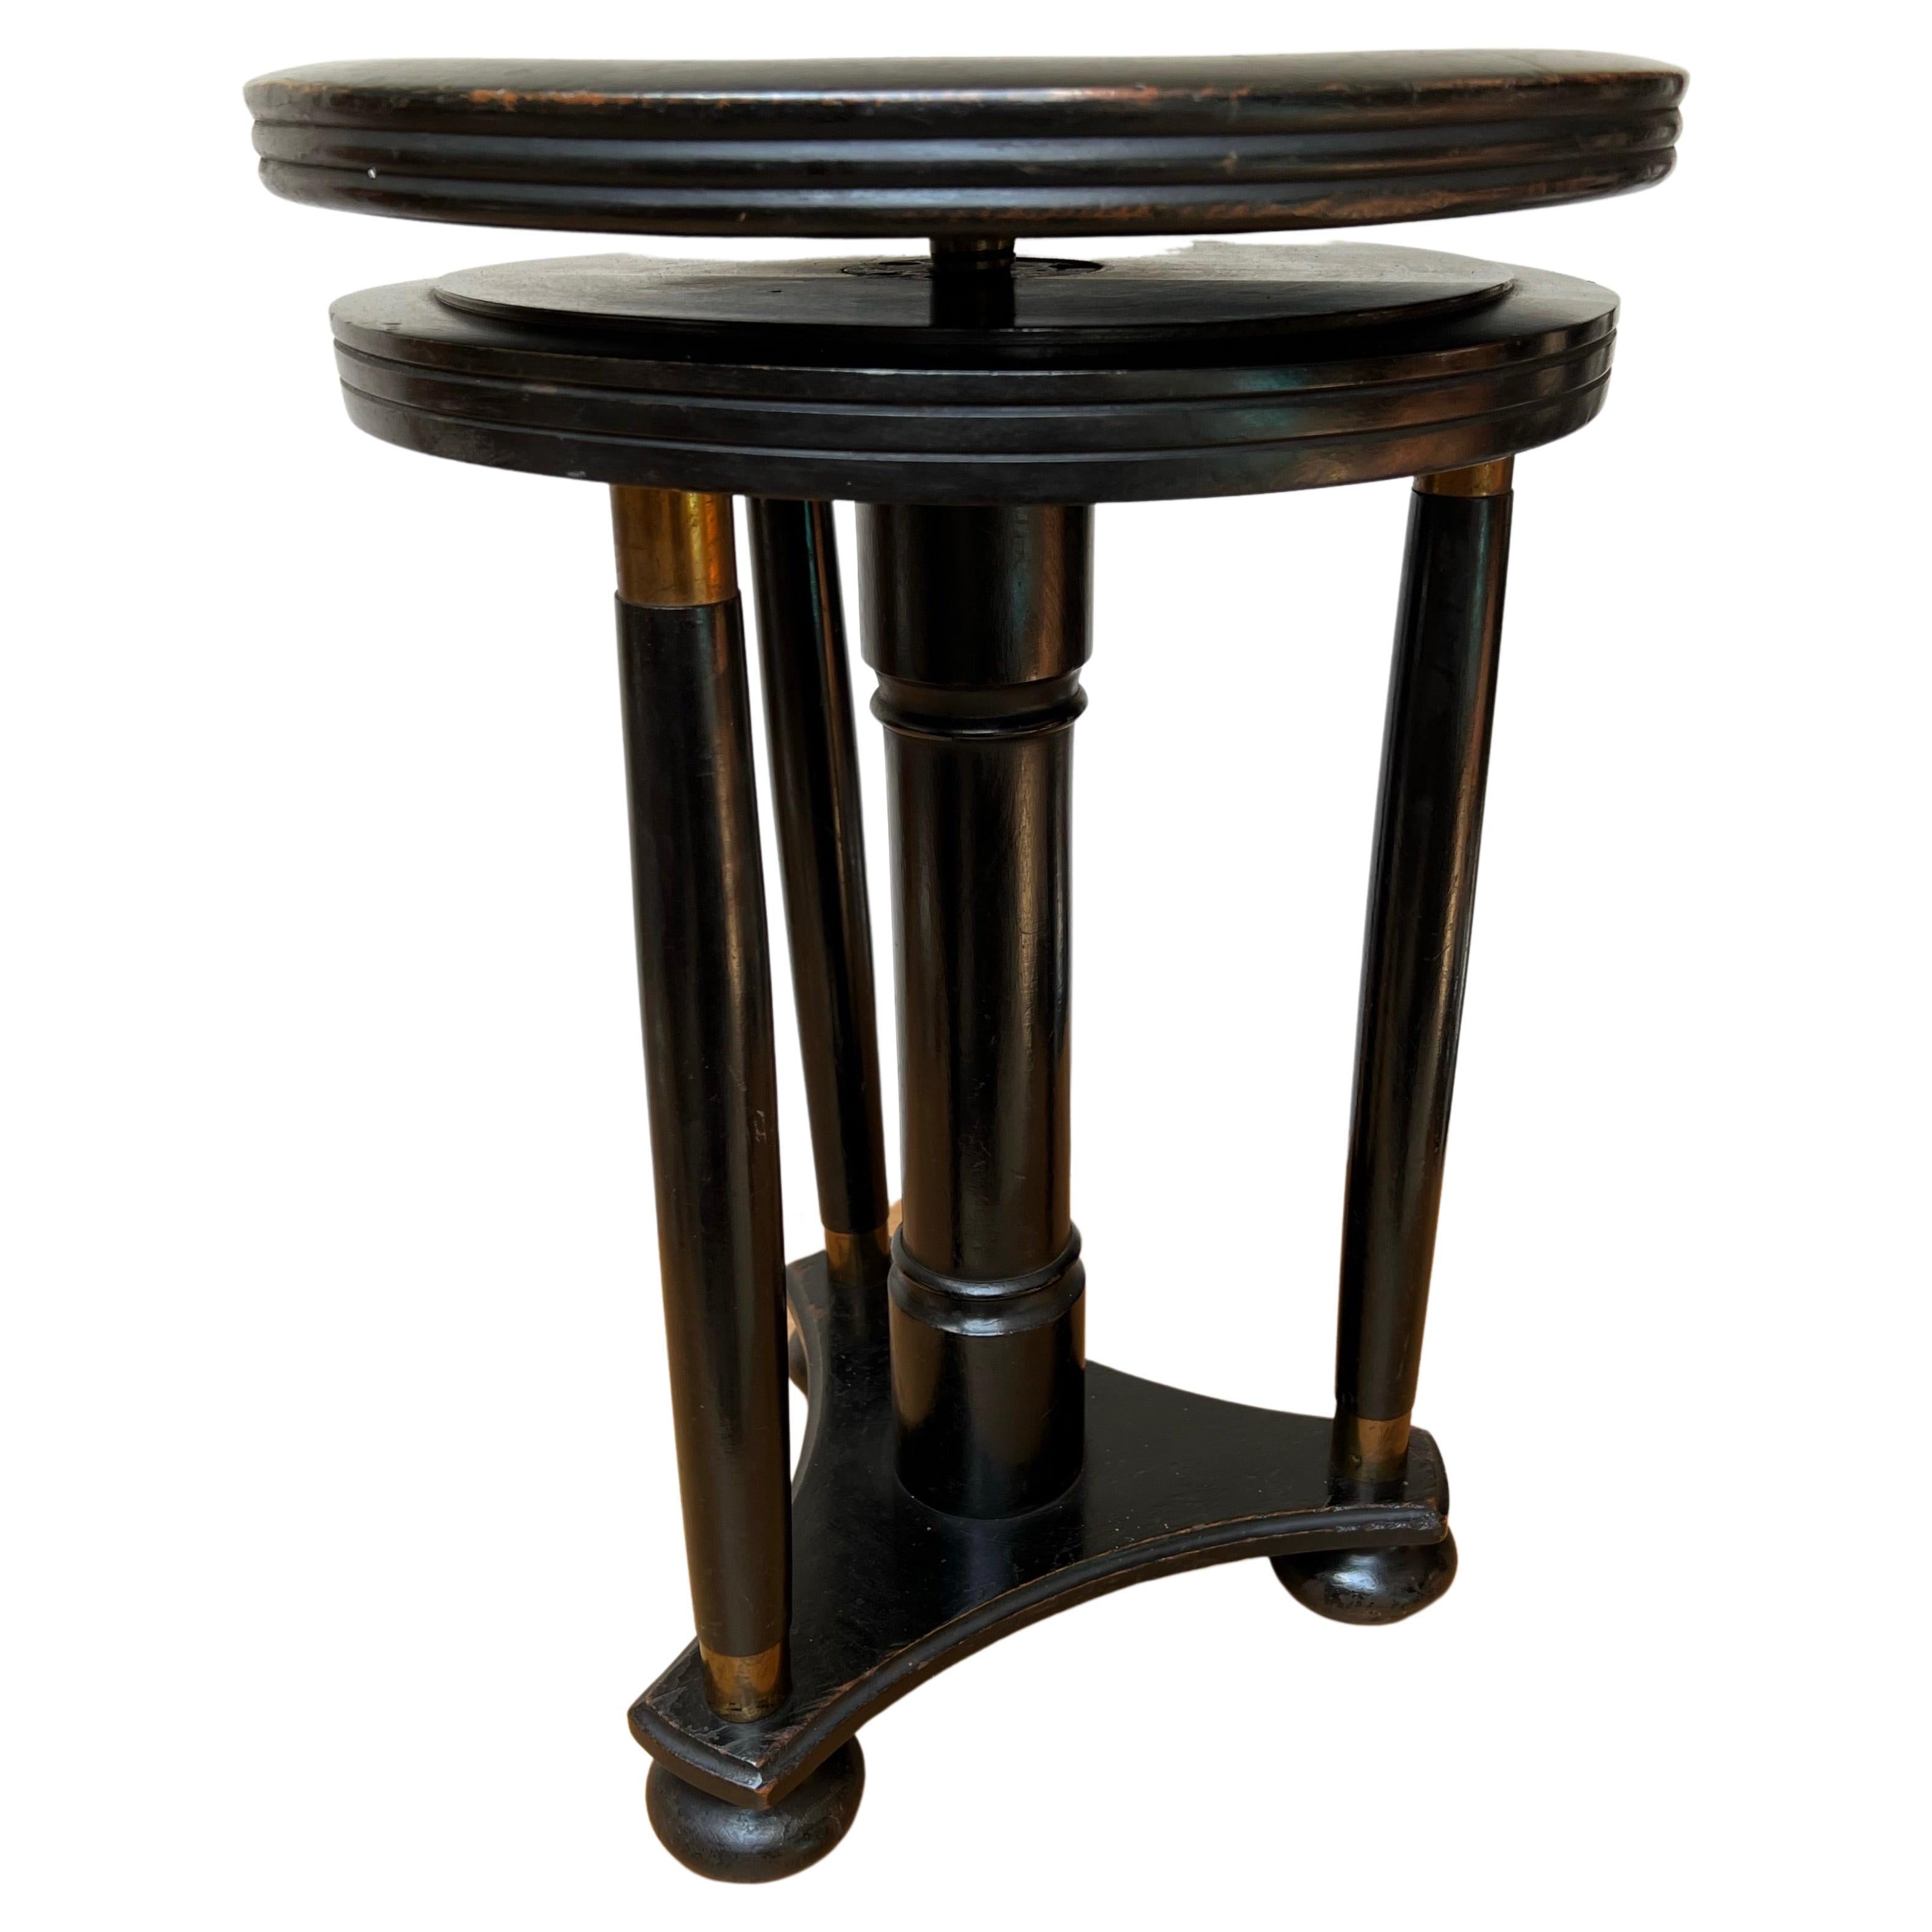 Rare stool in the Viennese Secession style.

This fine, rare and elegant wooden swivel stool from the early 1900s was hand-crafted in Austria and it is perfect for sitting behind a small desk or writing table and ofcourse for a piano However, as a